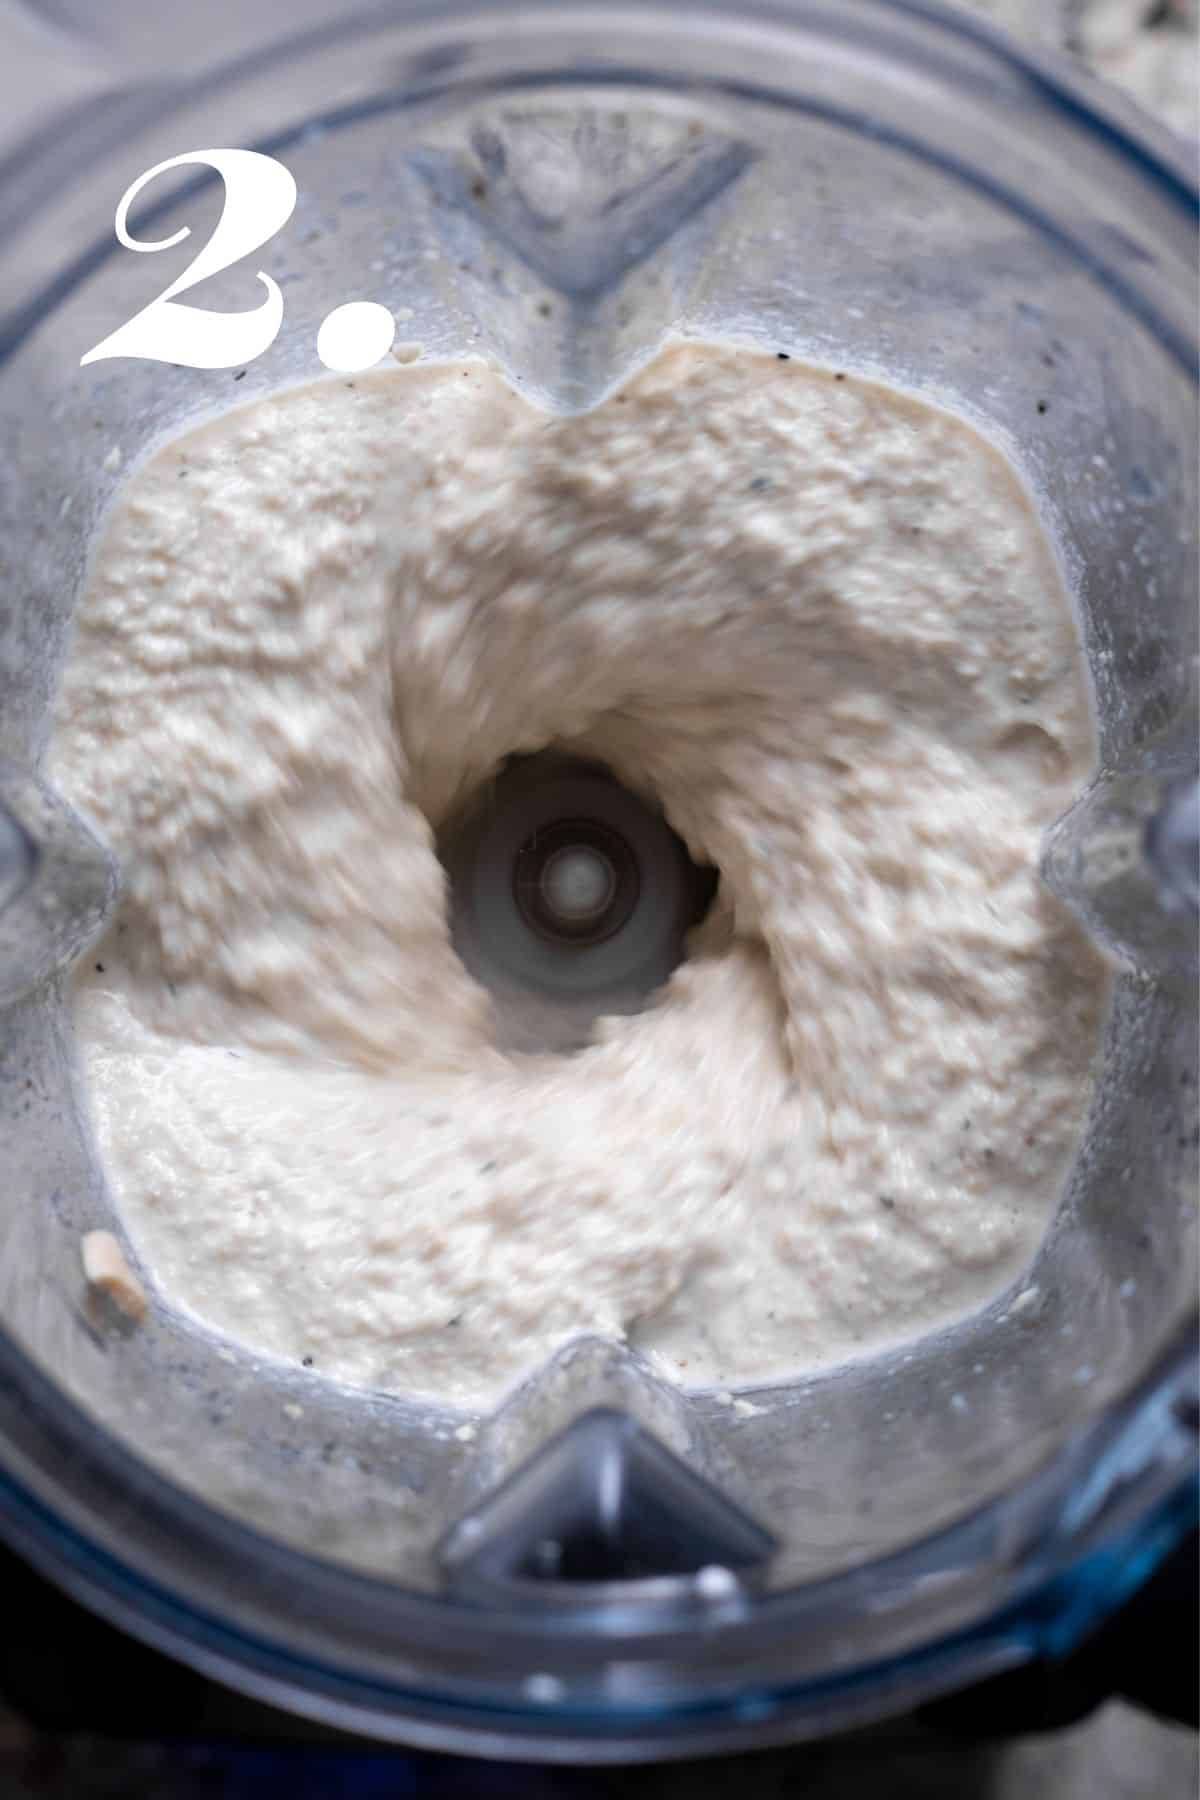 Cashew sour cream after blending for 20 seconds.